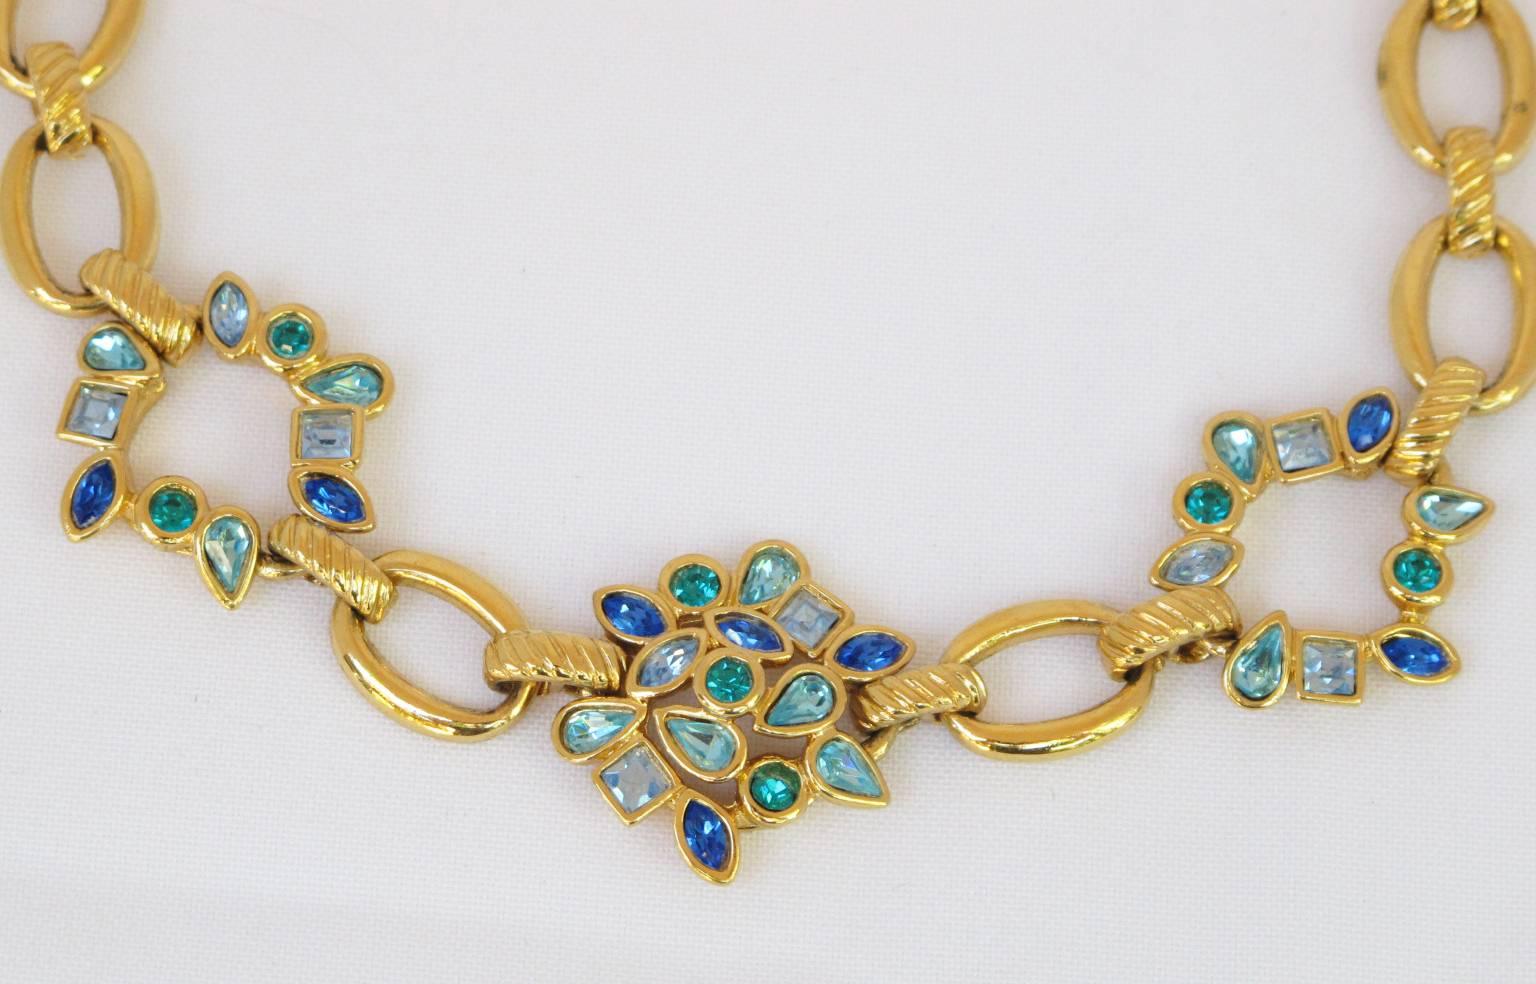 Yves Saint Laurent 1980s Necklace Goldtone with blue-green Rhinestones 1